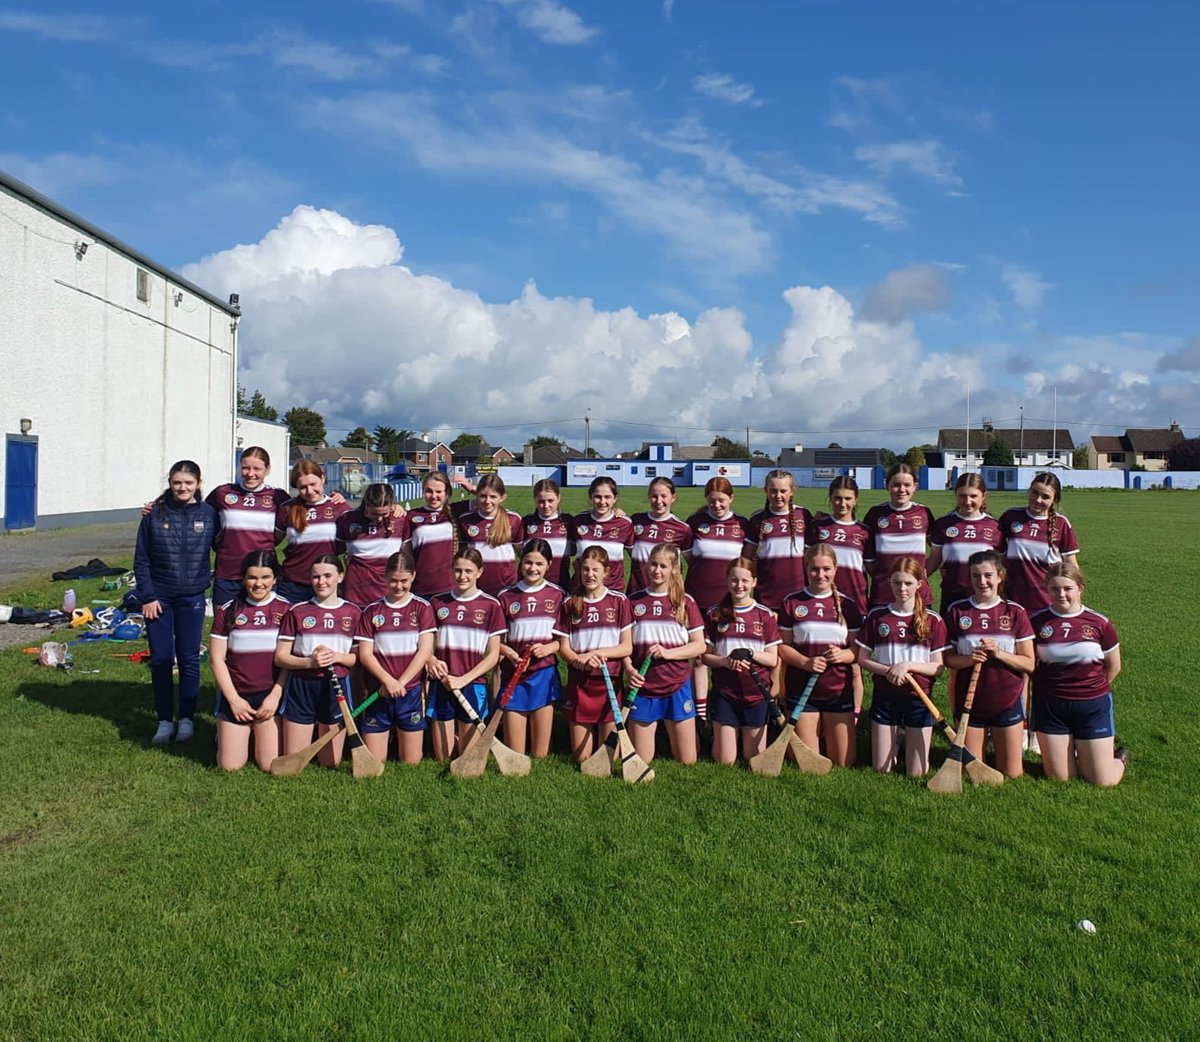 The very best of luck to our Junior camogie team in their Munster Final today. @MunsterCamogie